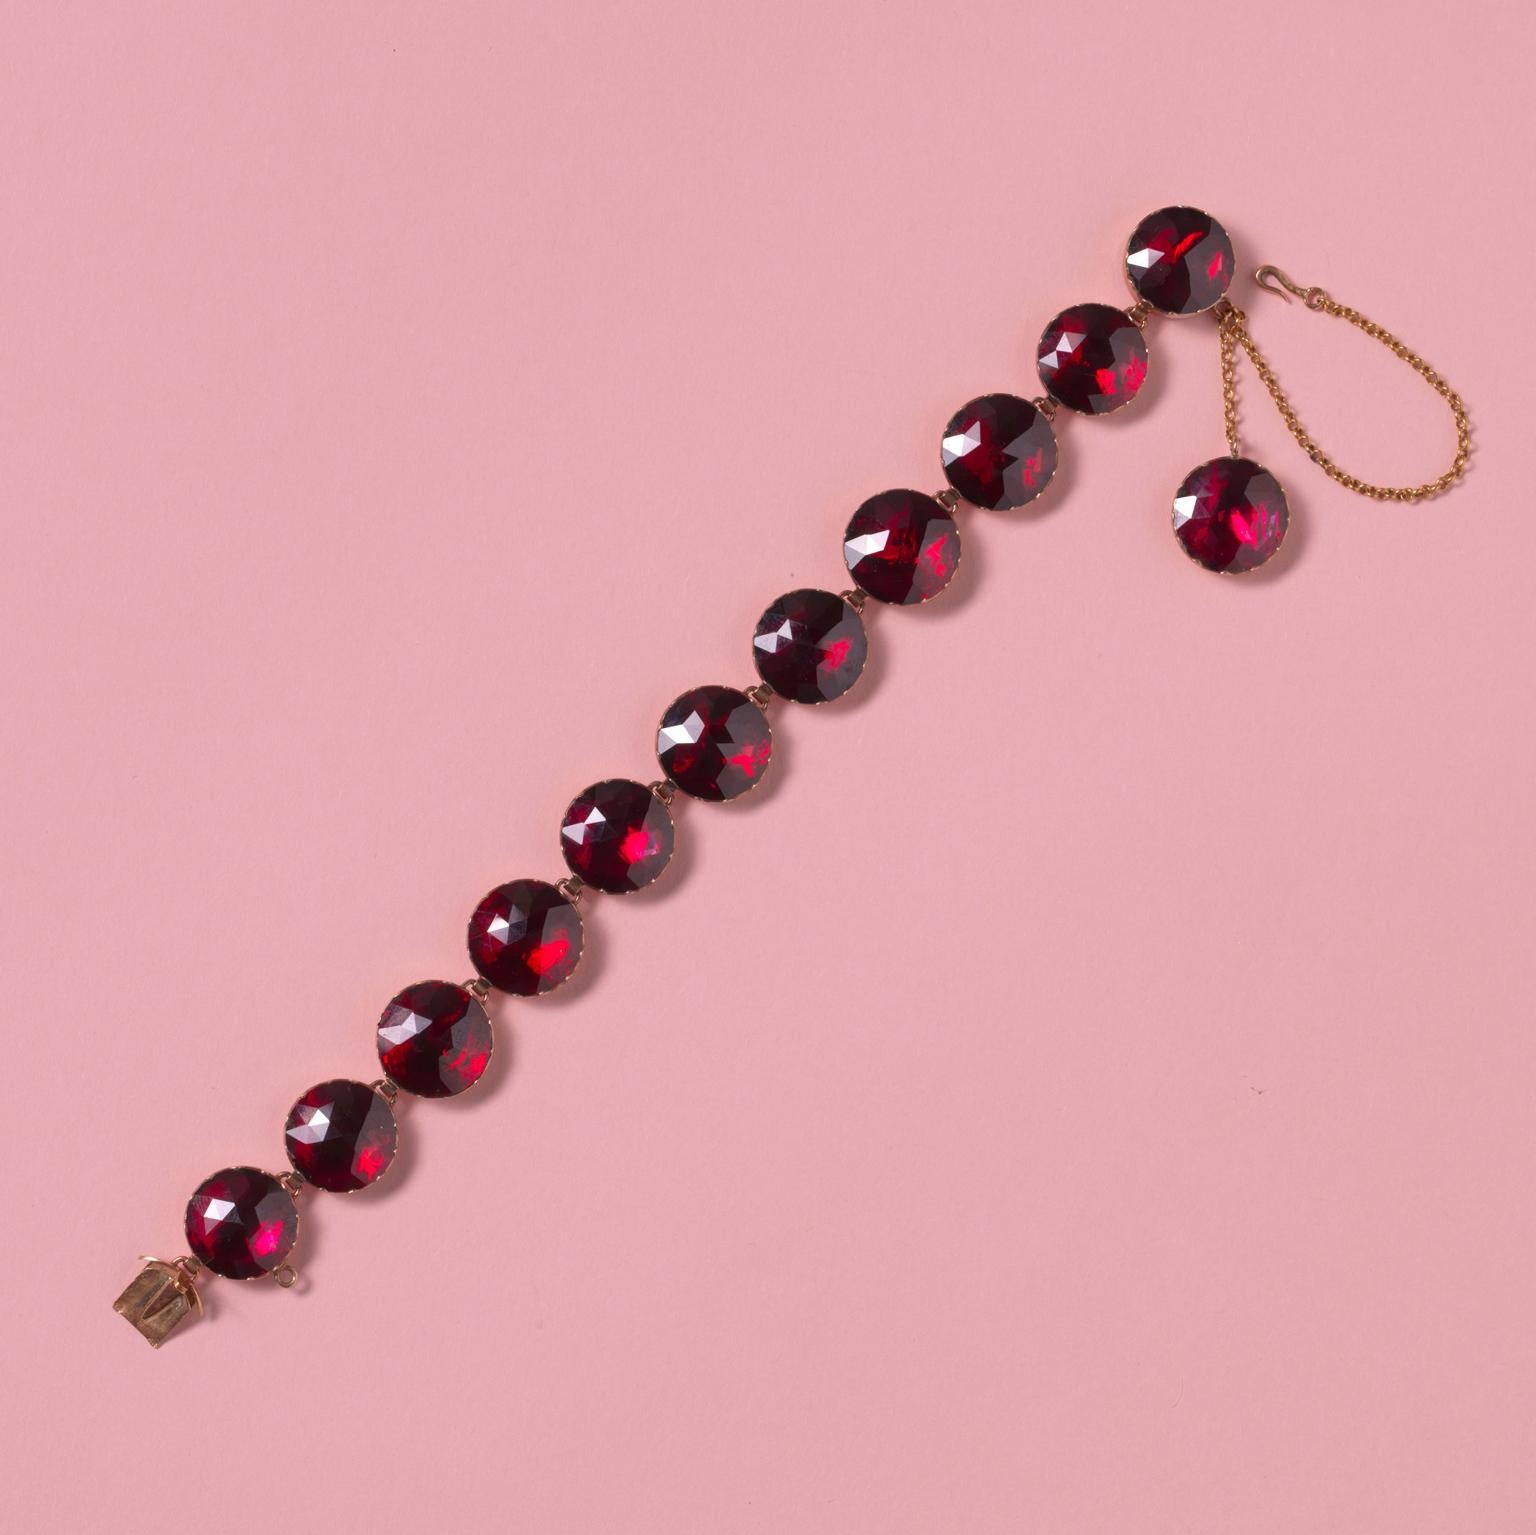 An 18 carat gold important bracelet with 11 large rose cut rhodolite or pyrope garnet links, closed set on red gold foil, an extra link as a charm on the safety chain, 19th century, South of France, Perpignan.

weight: 29 gram
dimensions: 19 x 1.4